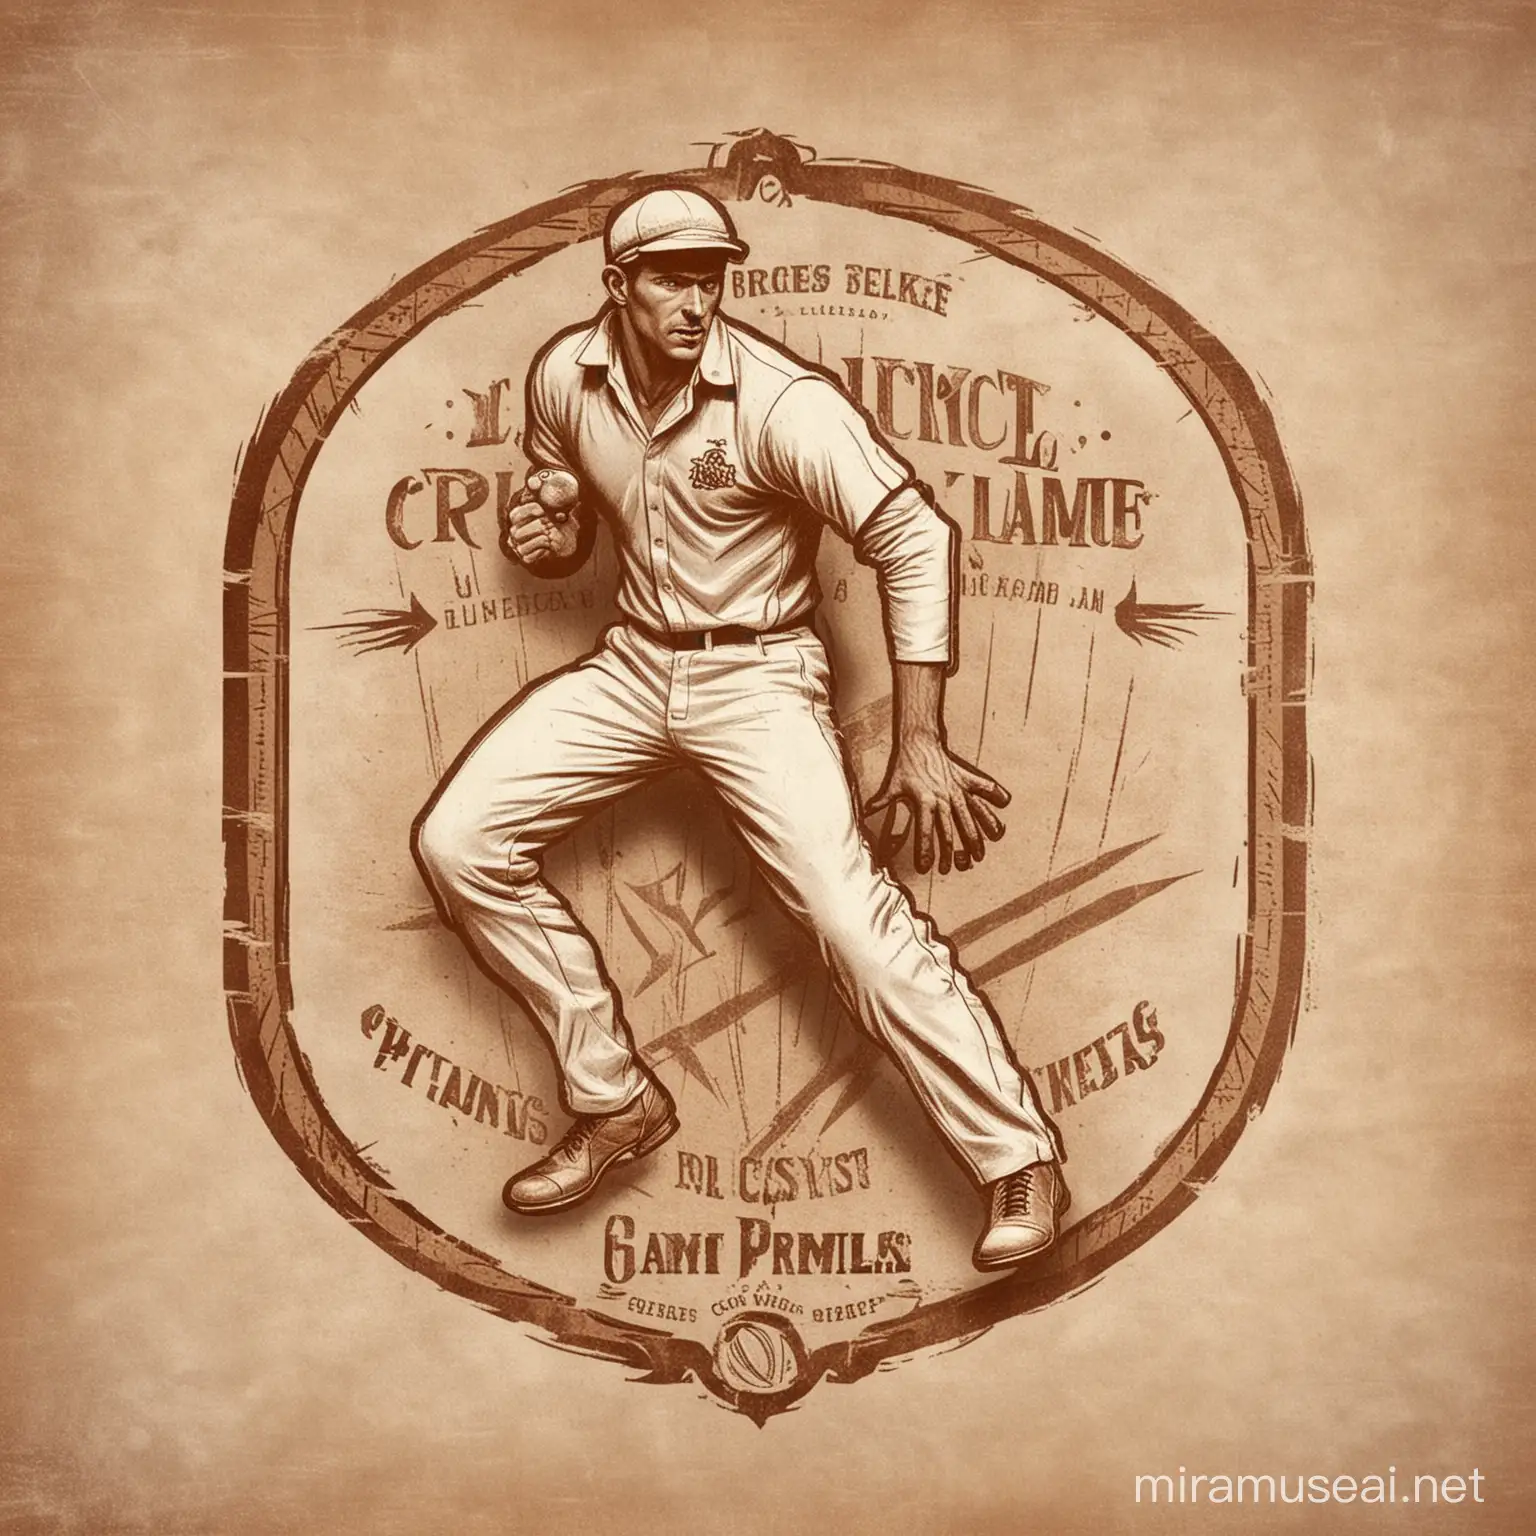 Vintage Cricket League Logo with Fast Bowler and Fallen Wickets